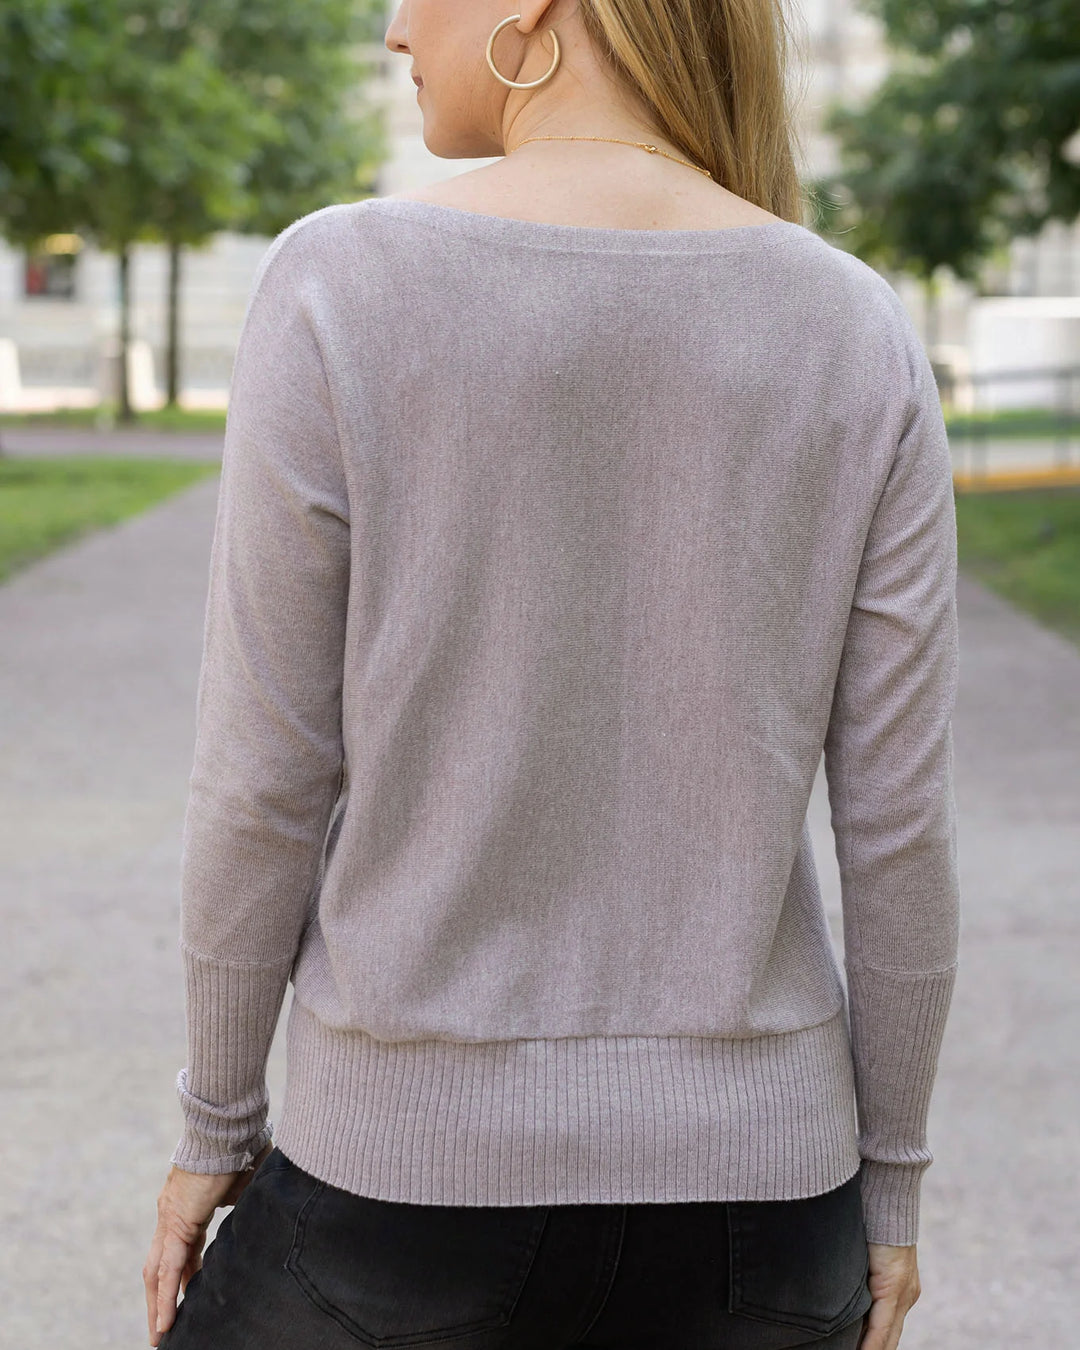 Grace and Lace | Classic & Cozy Sweater Top | Almondine